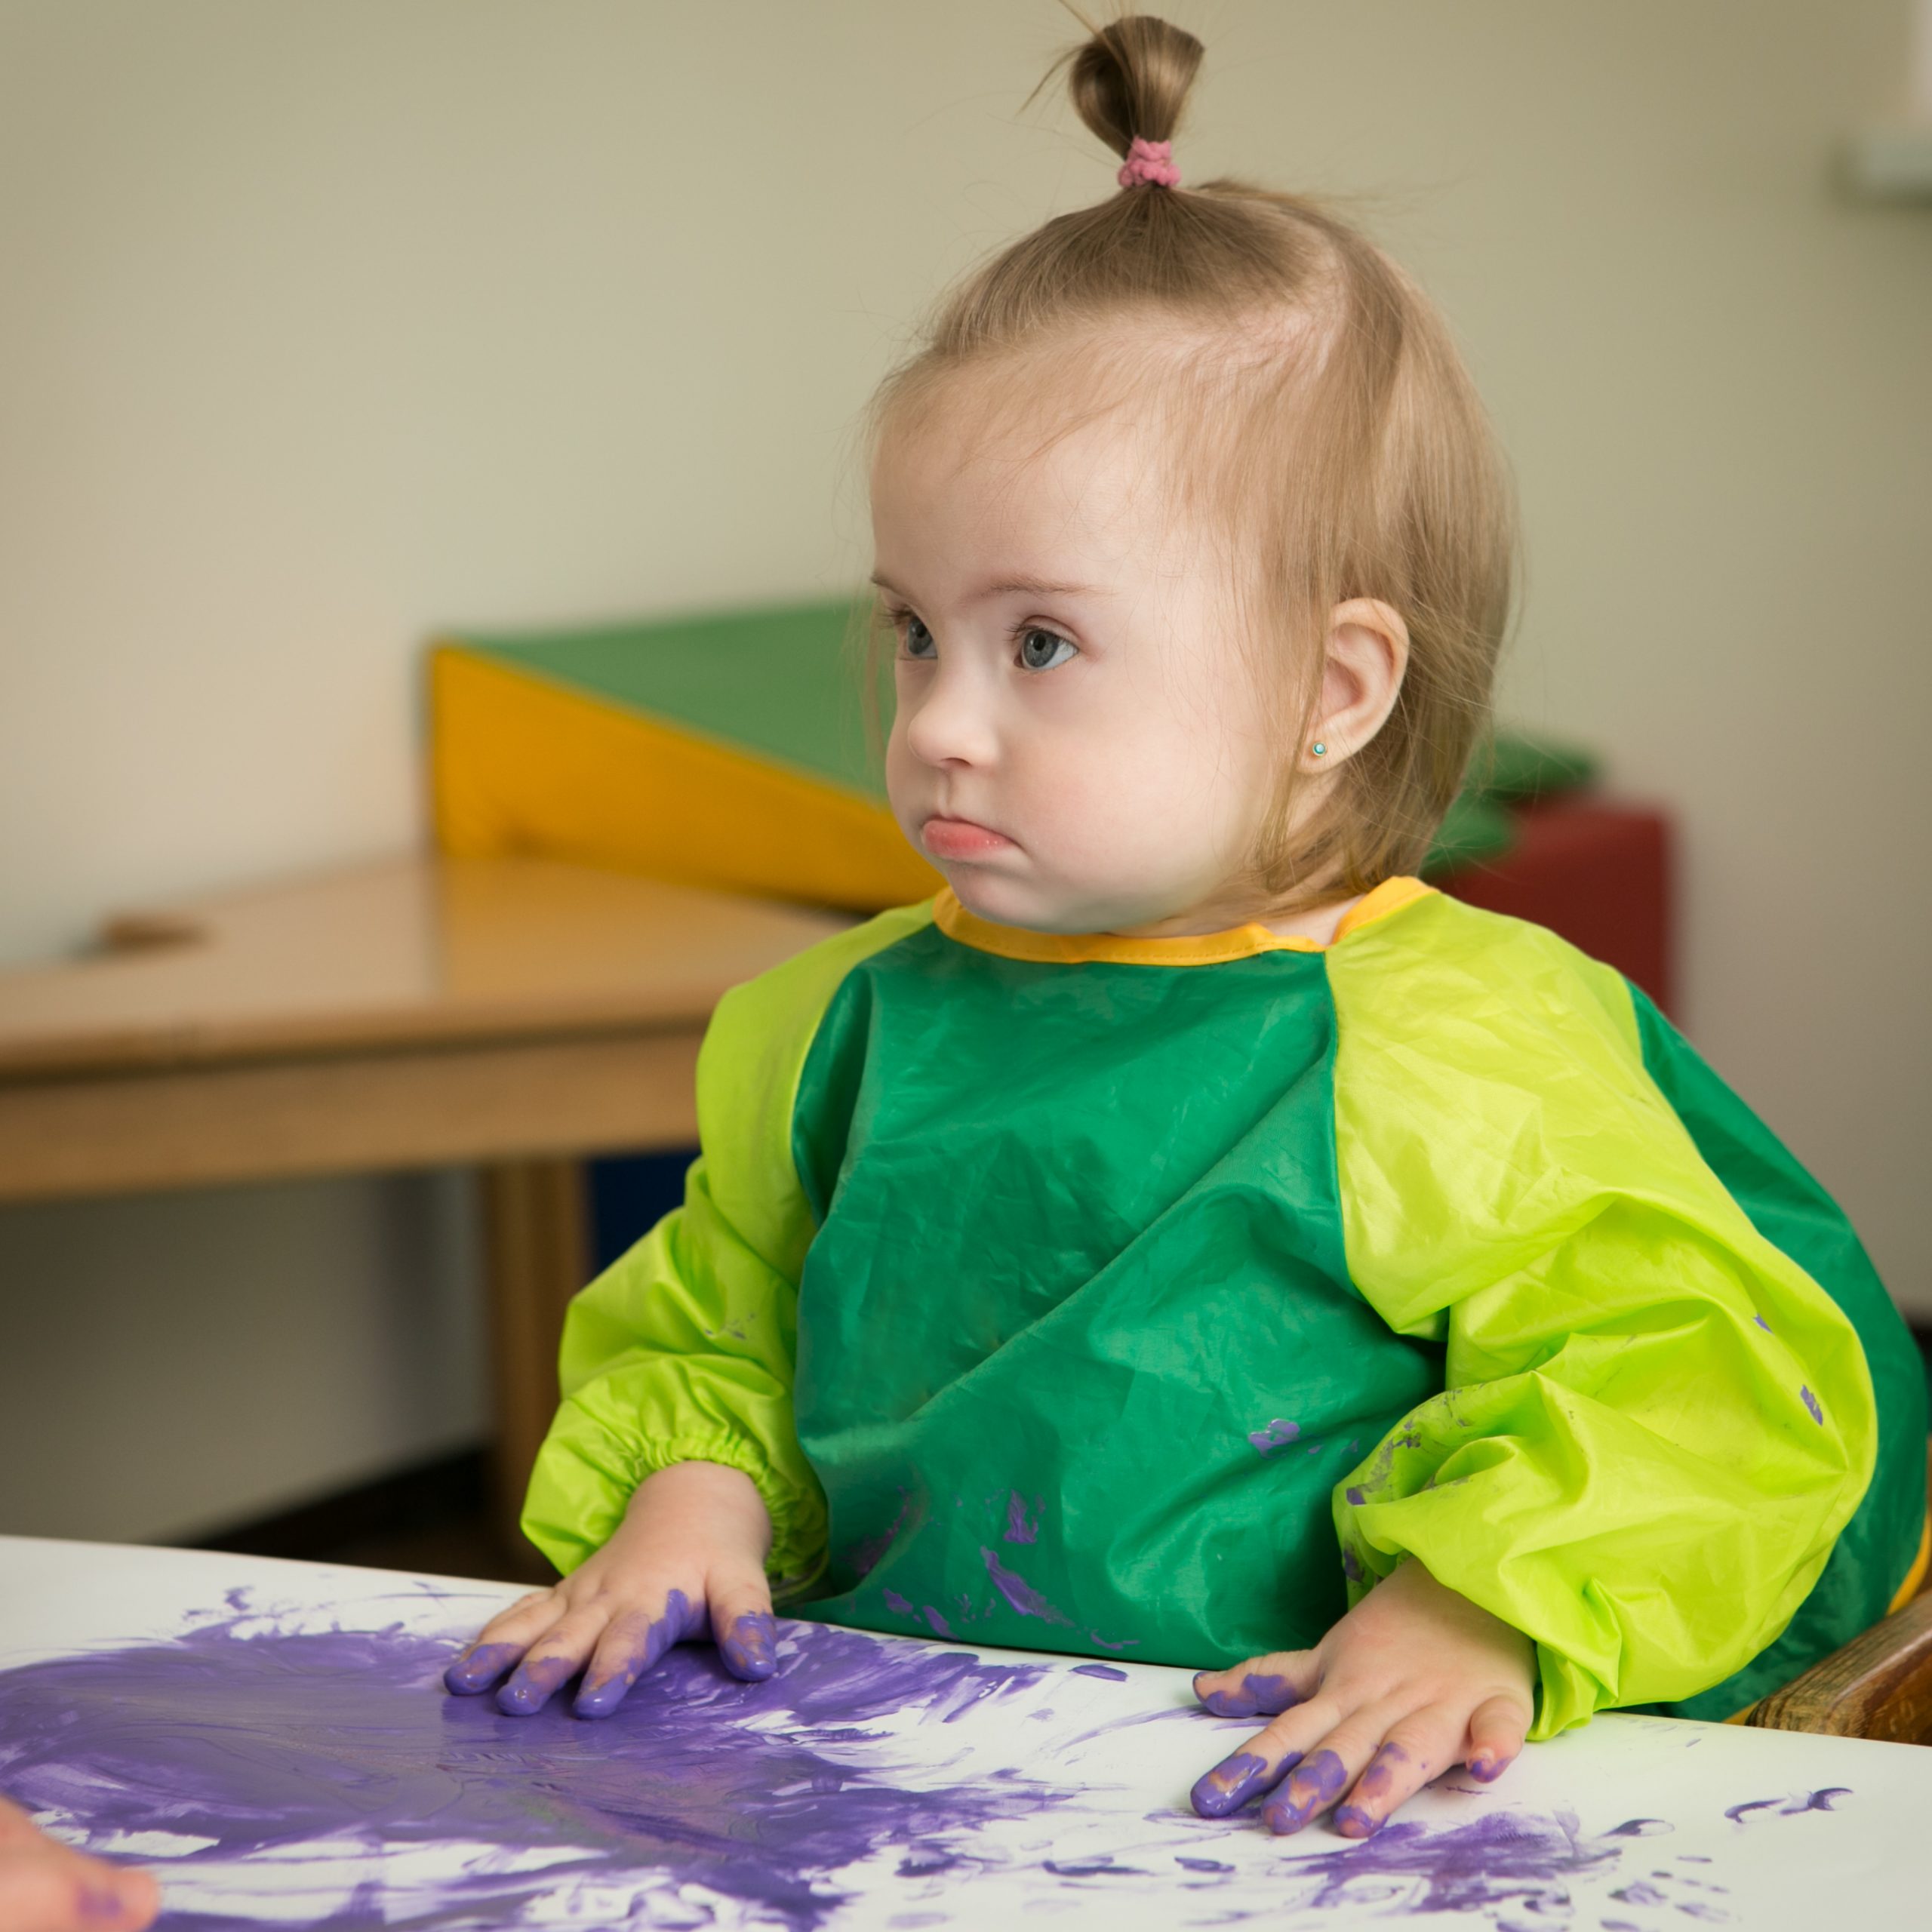 Toddler with Down Syndrome playing at a crafts table.